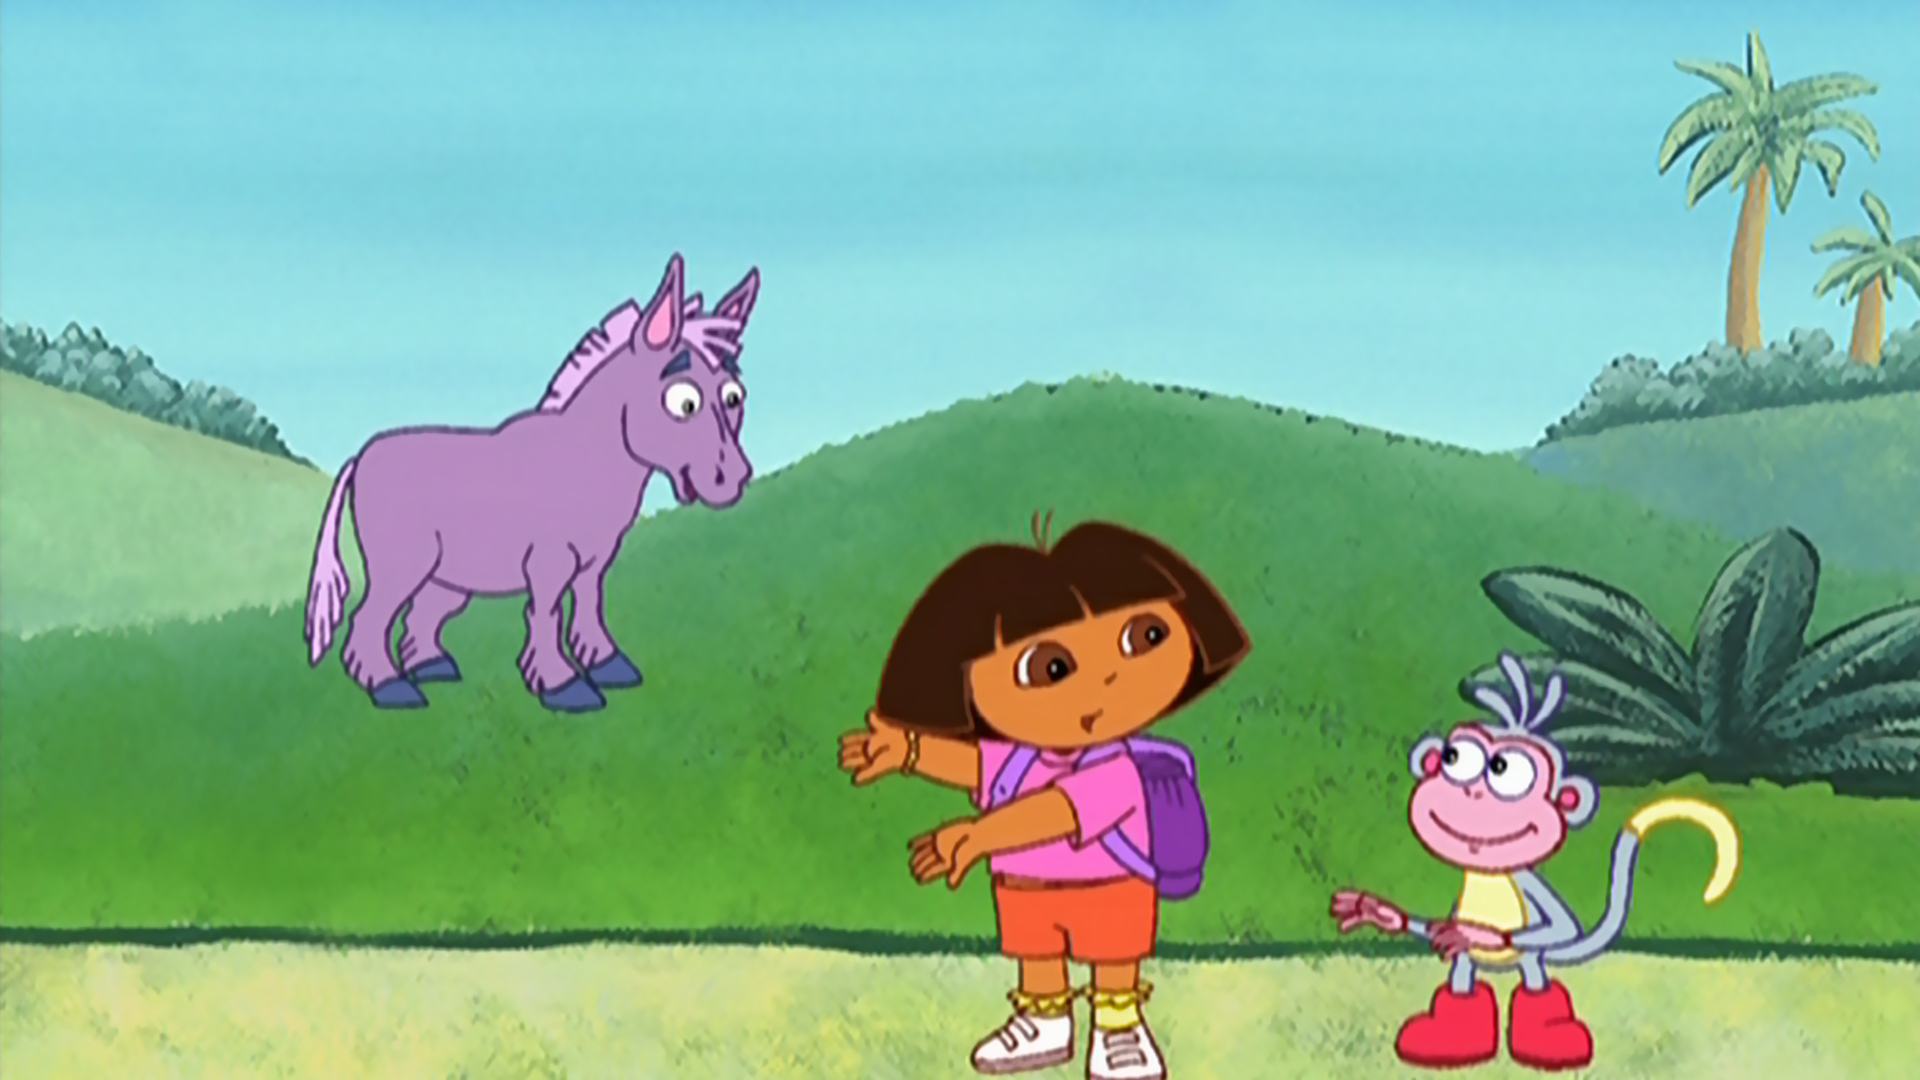 Riddles is the 26th episode of dora the explorer from season 1. 